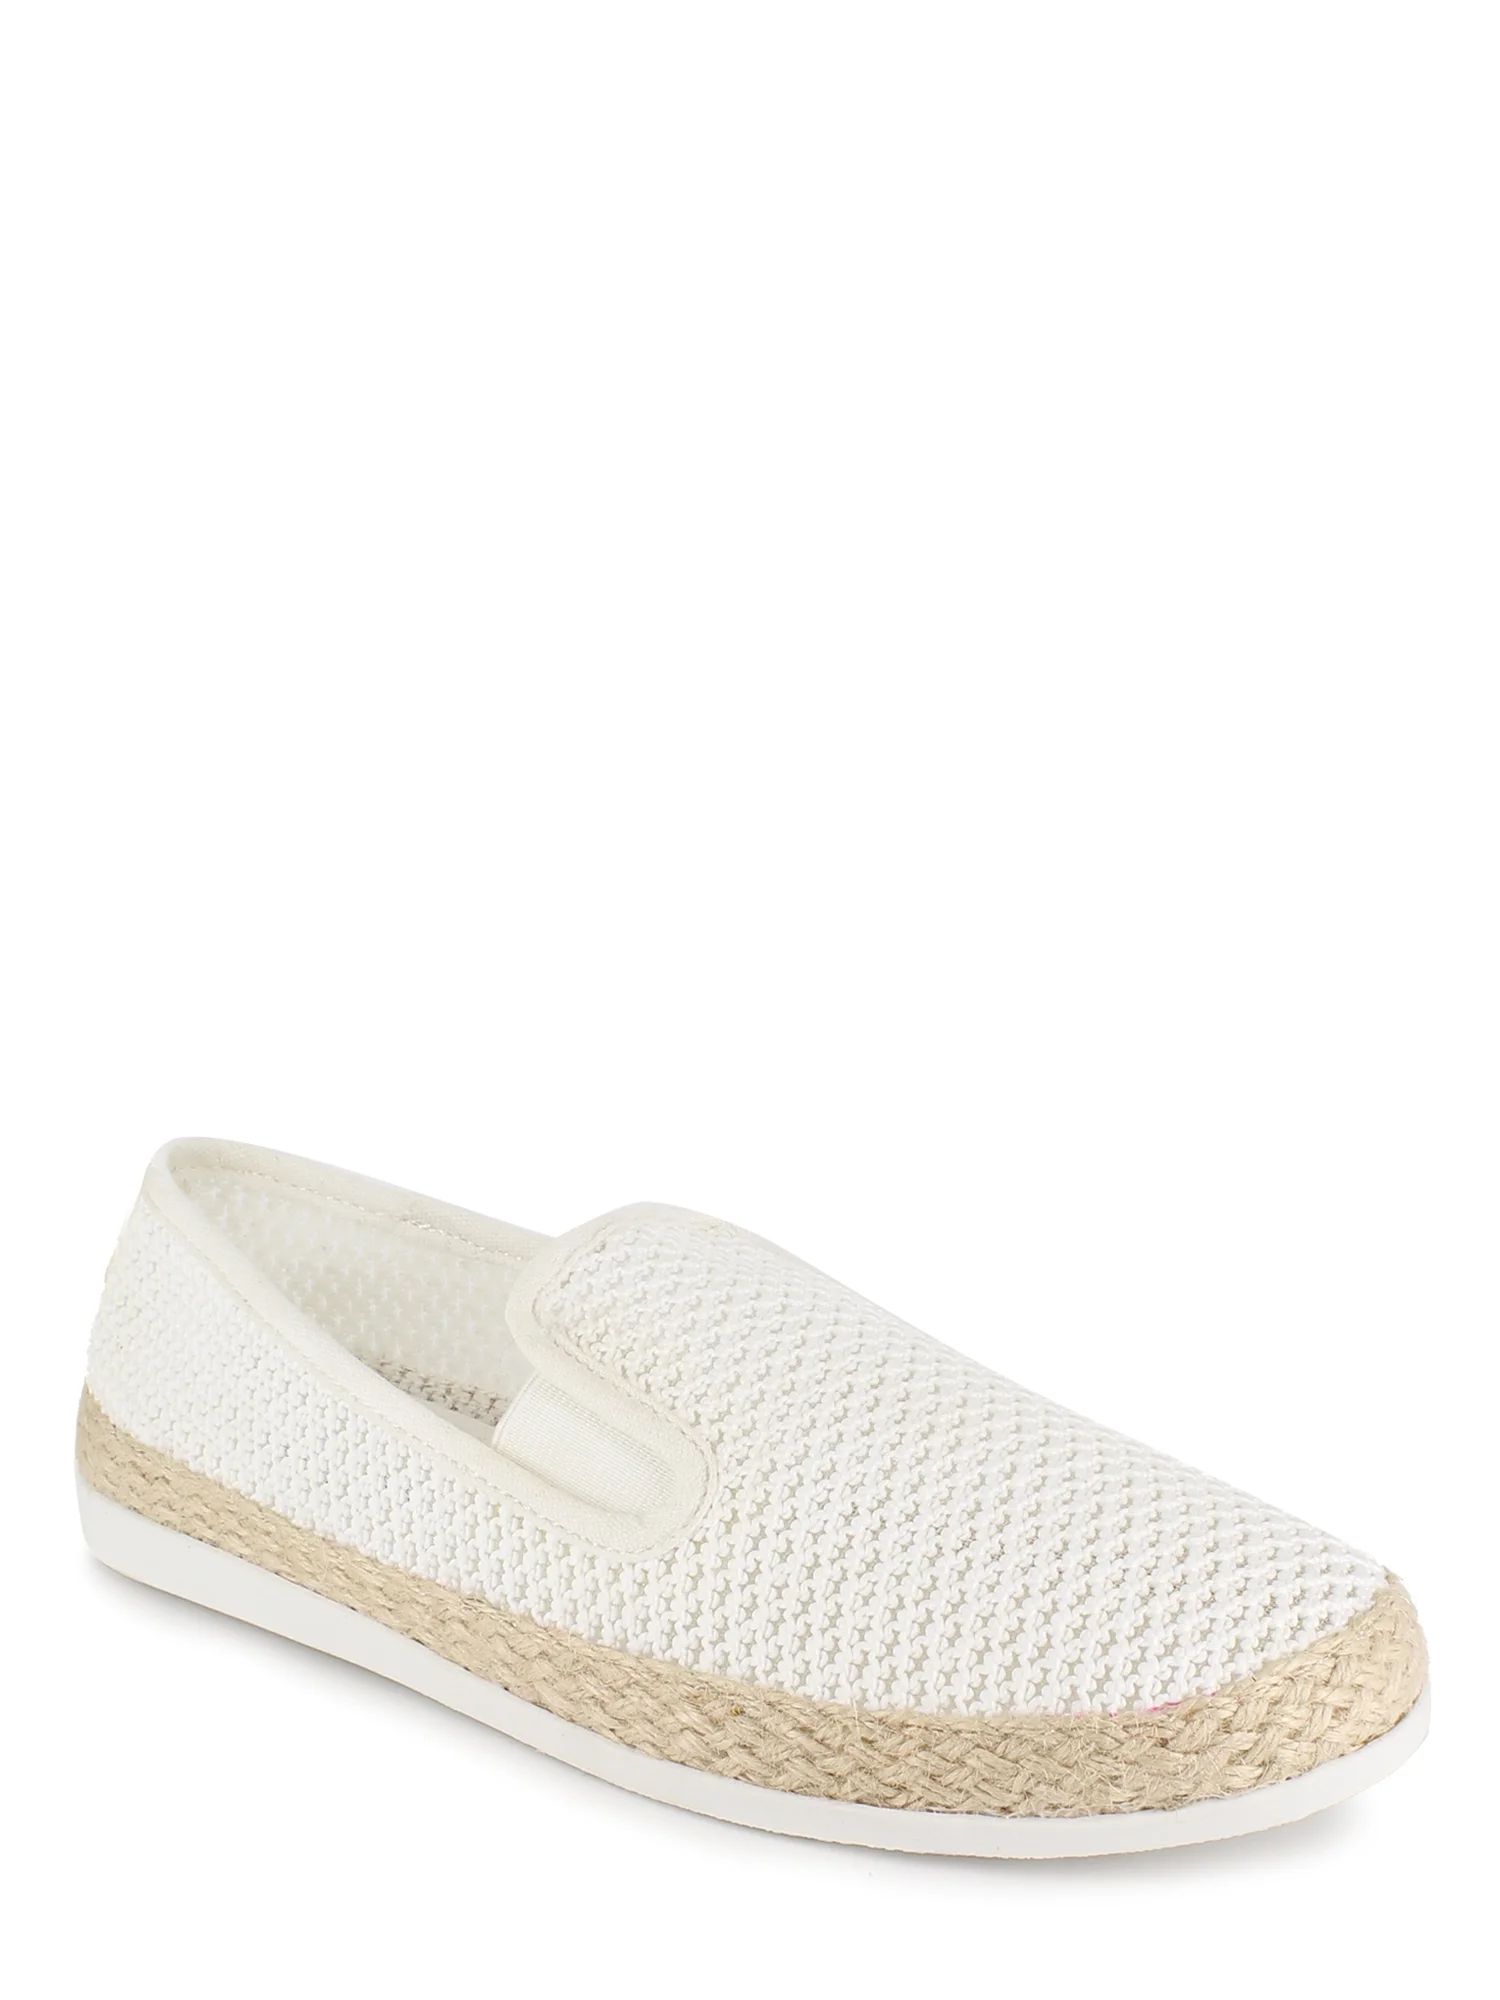 PORTLAND by Portland Boot Company Perforated Espadrille Slip On (Women's) | Walmart (US)